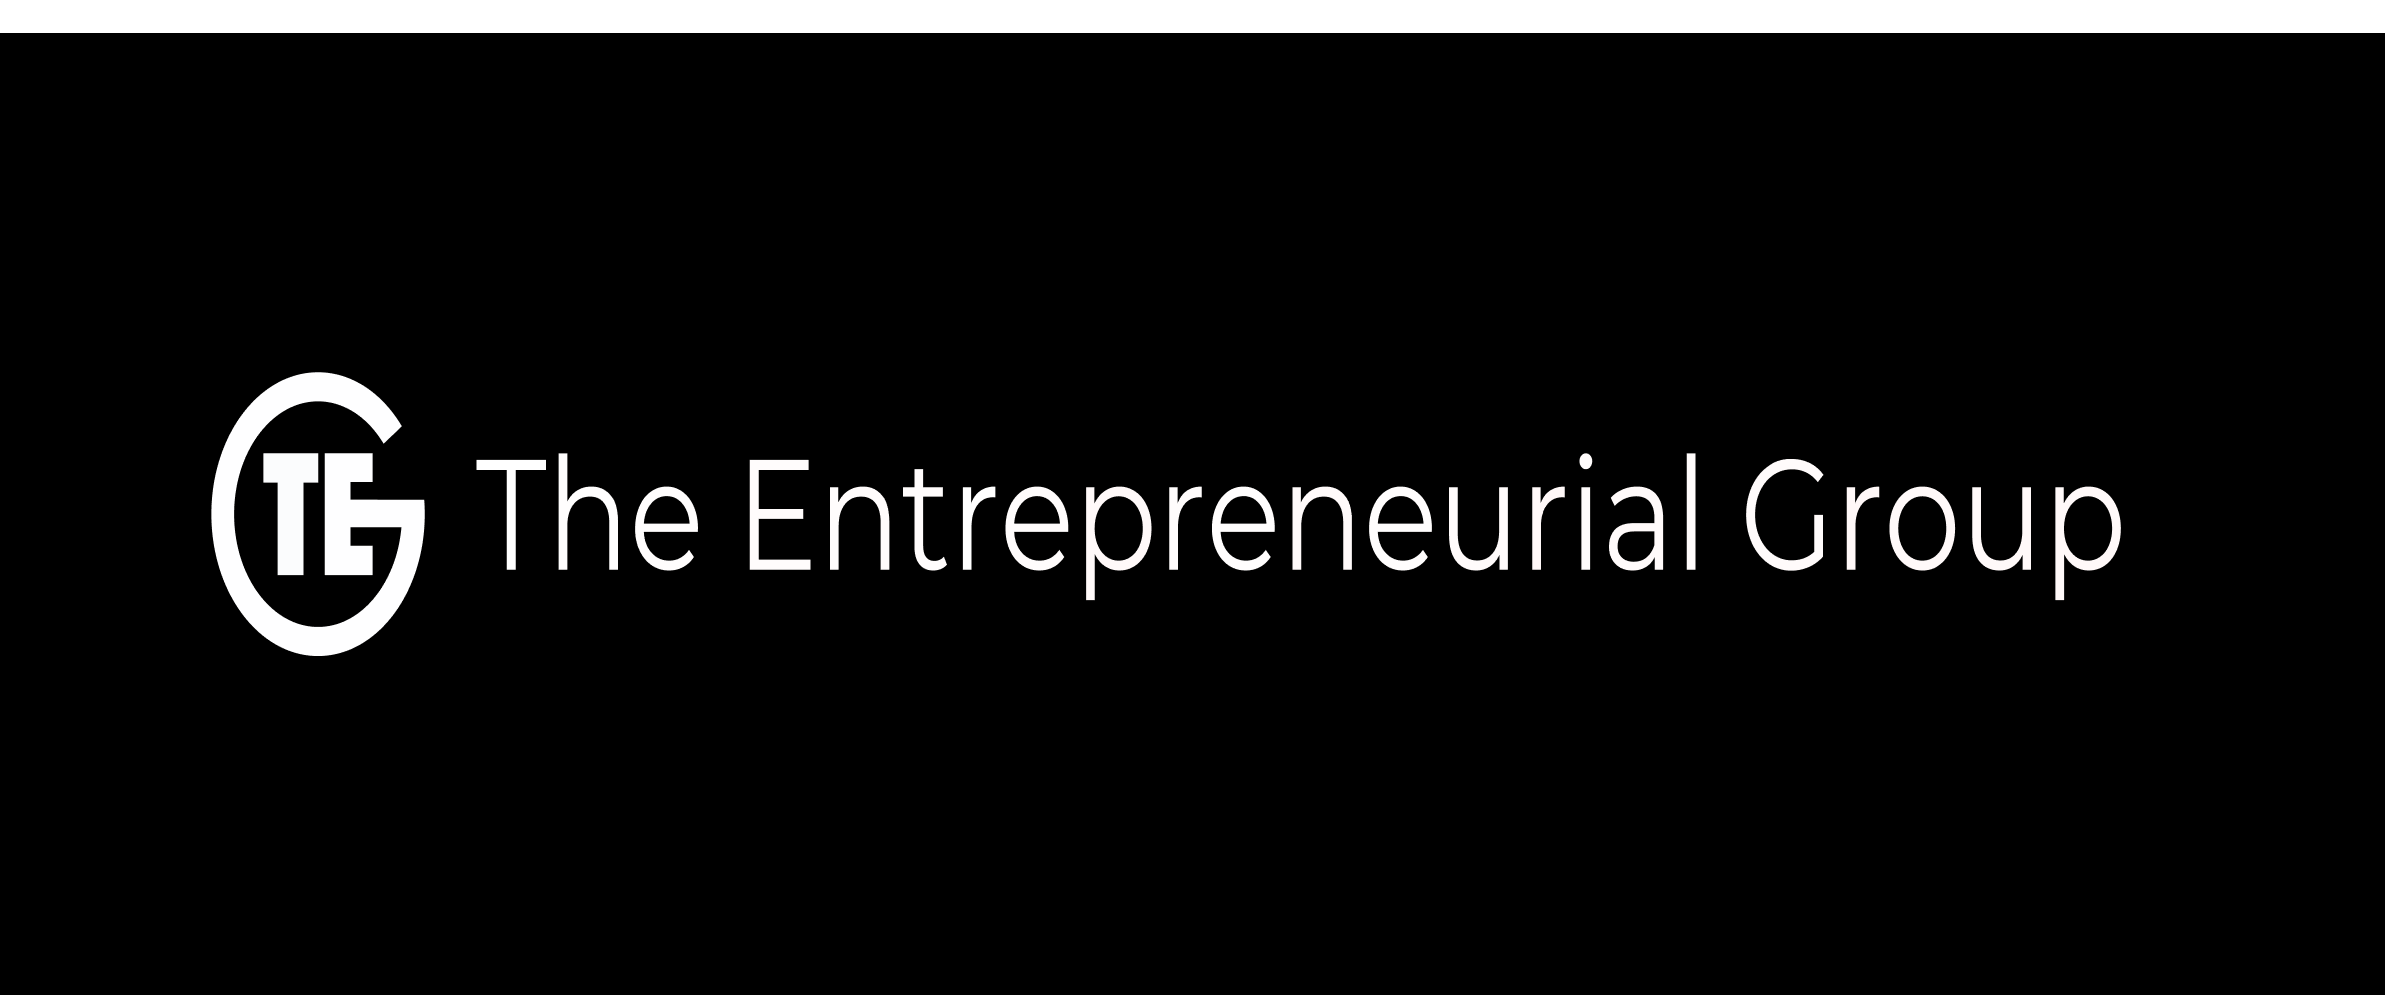 NetworkP The entrepreneurial Group